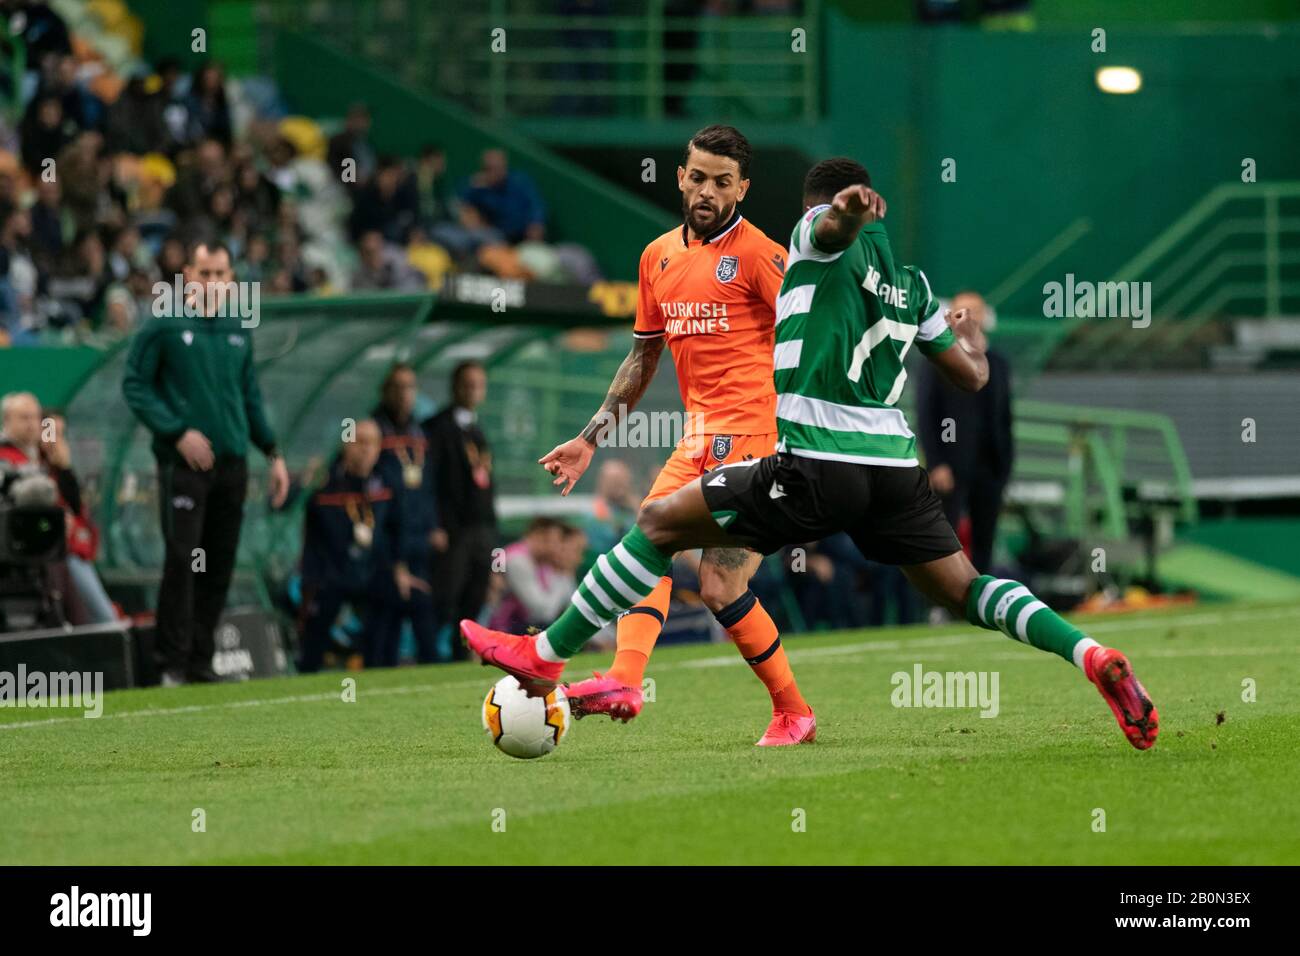 Istanbul Ba?ak?ehir FK player Júnior Caiçara (L) and Sporting CP player Jovane Cabral (R) are seen in action during the UEFA Europa League Match 2019/20, Sporting CP vs Istanbul Ba?ak?ehir FK at José Alvalade Stadium.(Final Score: Sporting CP 3 -1 Istanbul Ba?ak?ehir FK) Stock Photo